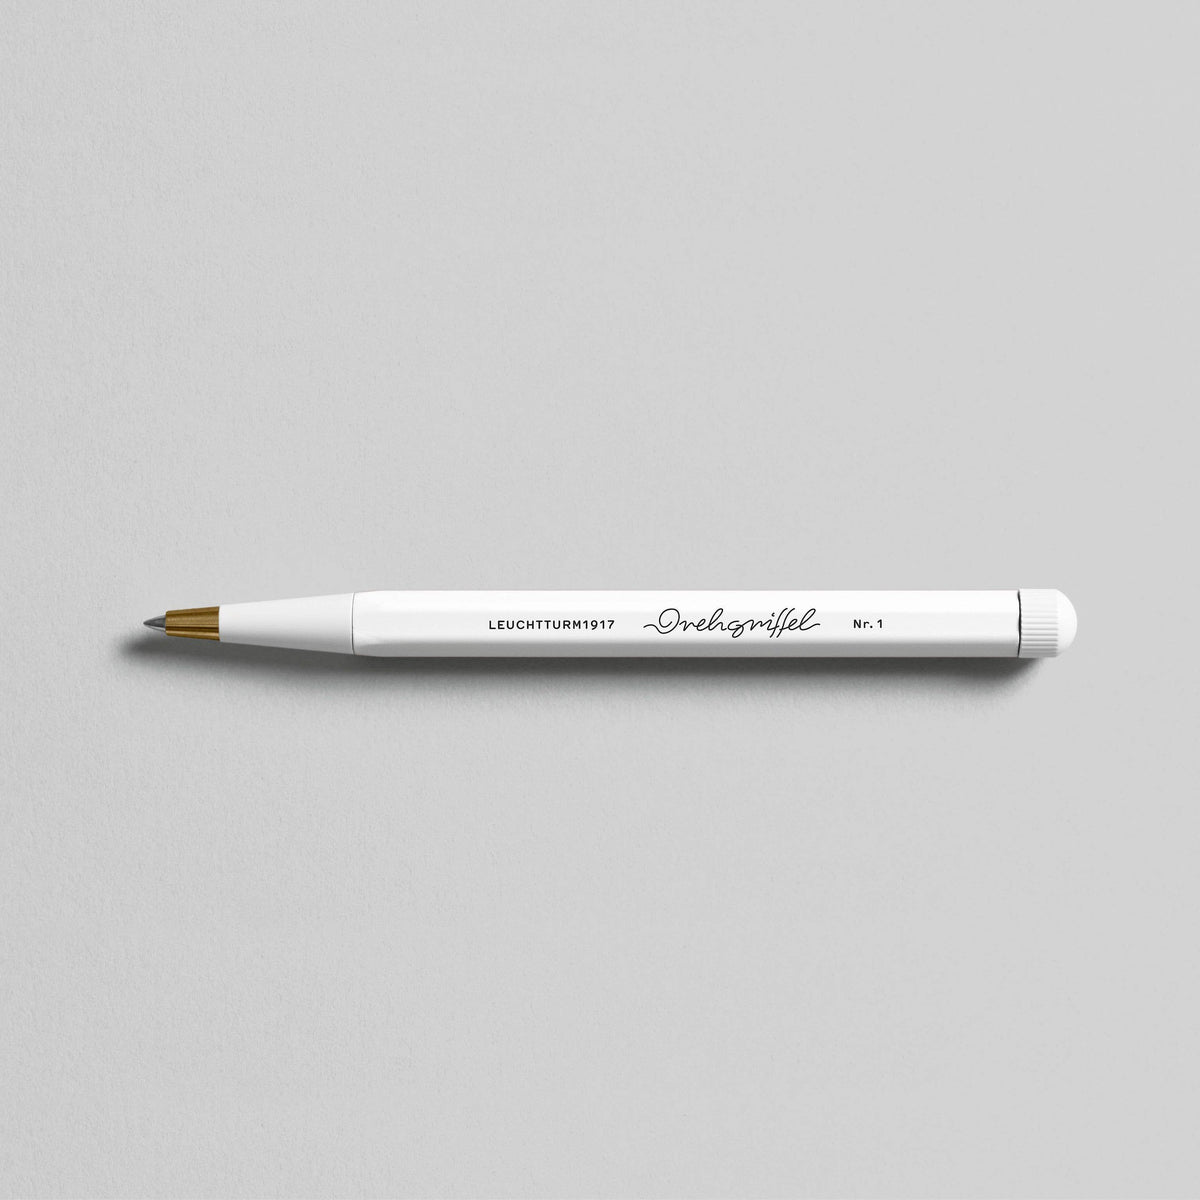 A LEUCHTTURM1917 Drehgriffel Nr. 1 - Gel Pen: White with a gold tip, Germany&#39;s finest writing instrument, on a gray surface.